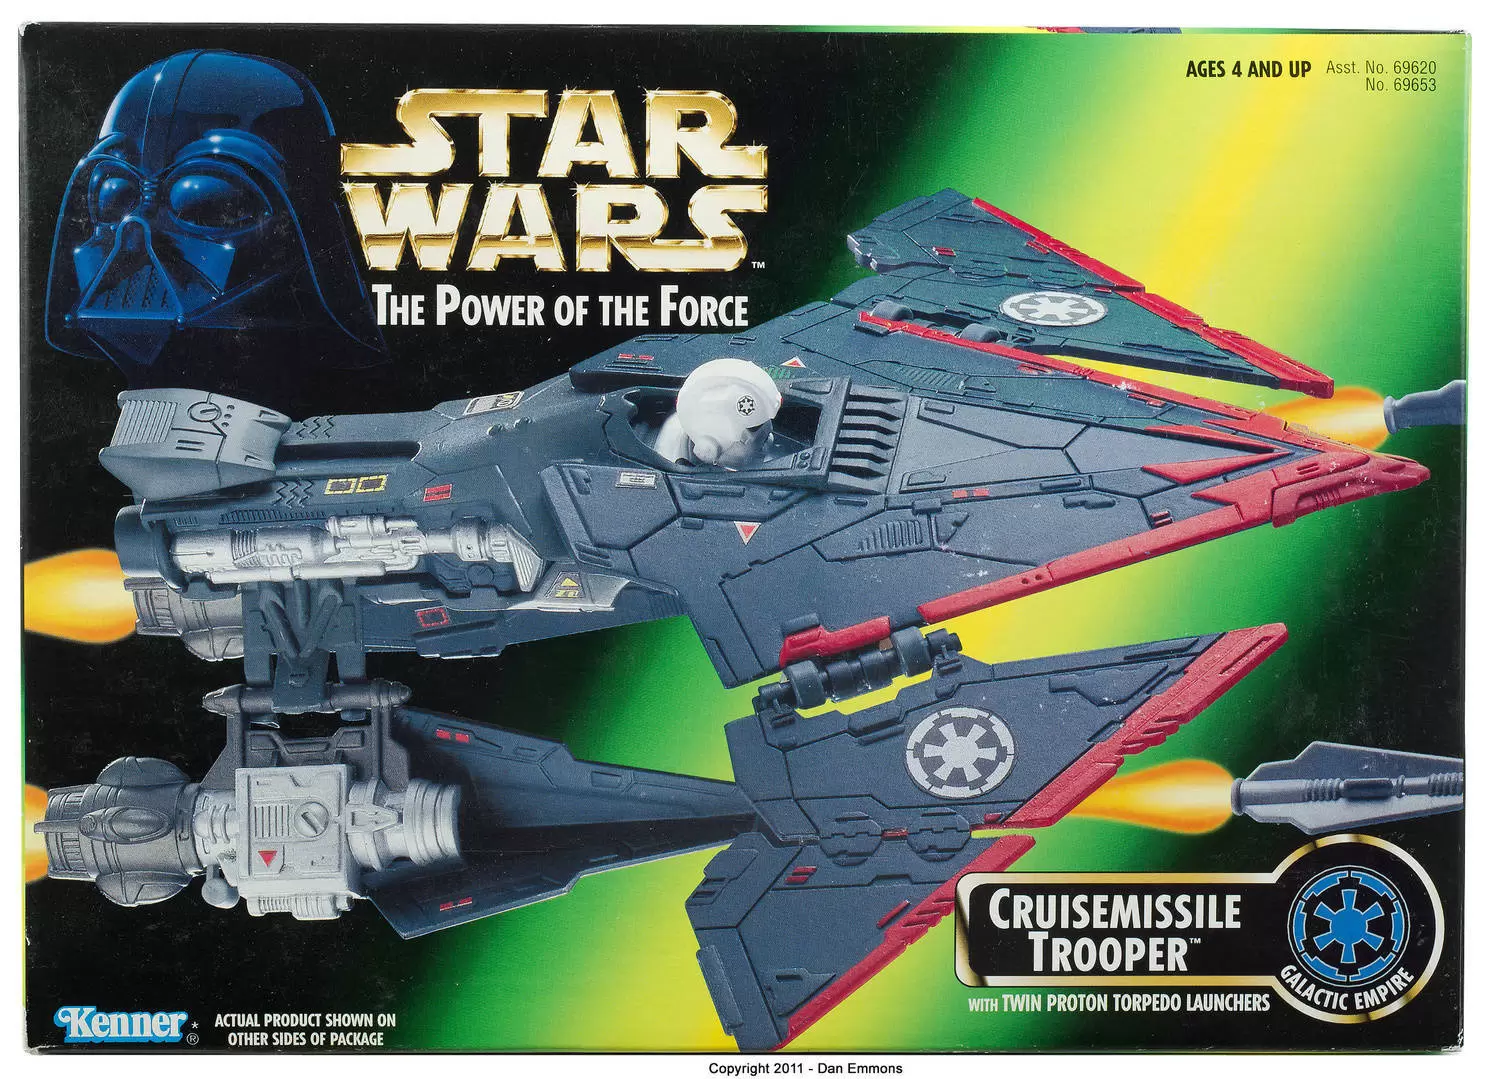 Power of the Force 2 - Cruisemissile Trooper